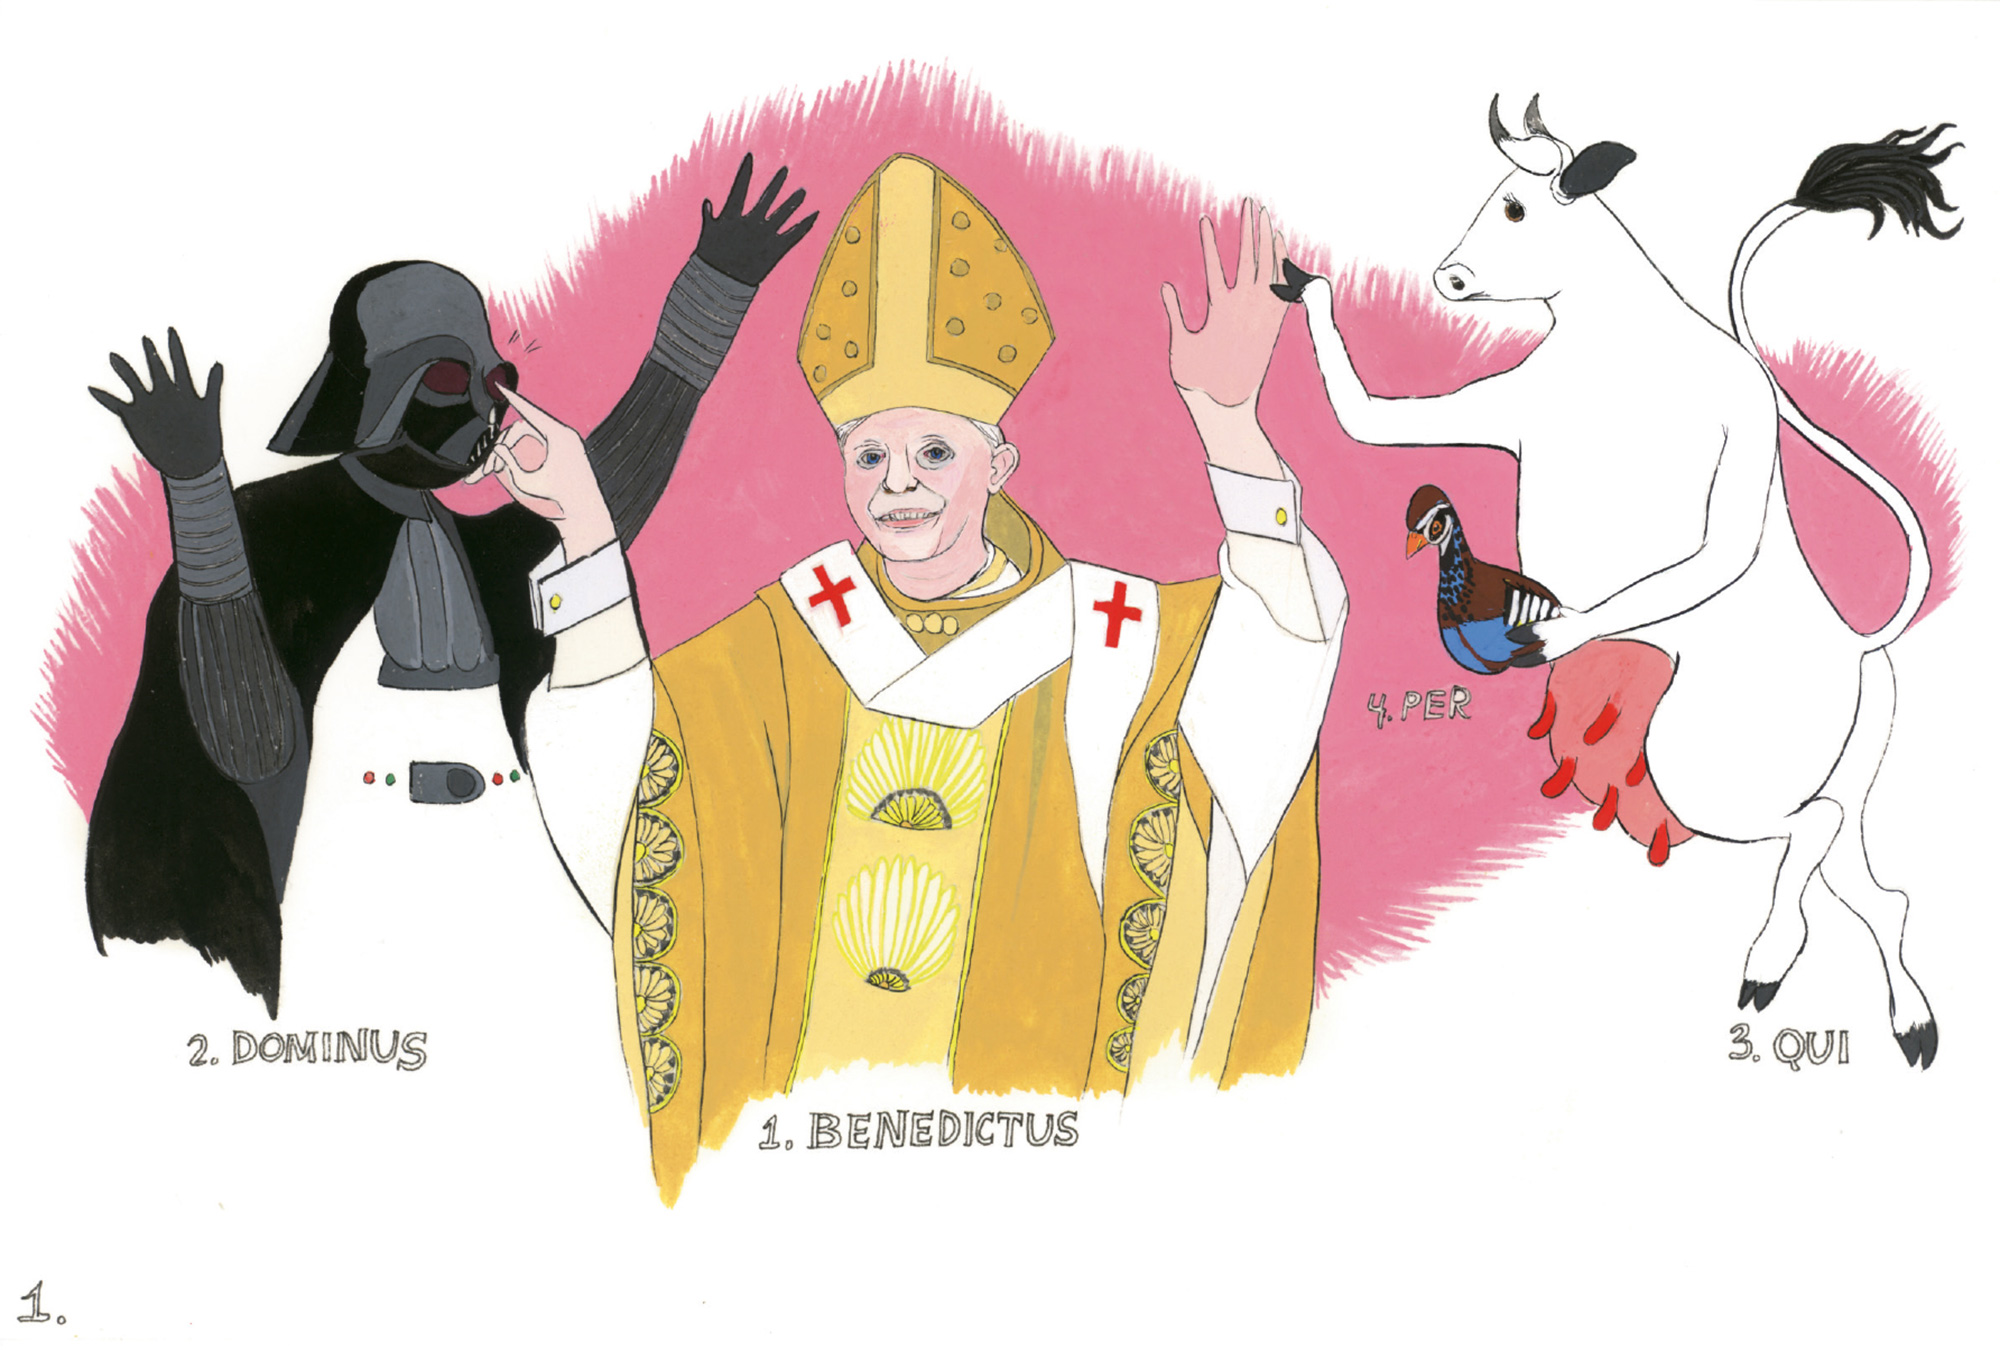 An artwork by Amy Jean Porter depicting the Pope, Darth Vader, a cow holding a duck, and a pink swash of color. The four figures are numbered and captioned. Respectively these captions read: “Benedictus,” “Dominus,” “Qui,” and “Per.”